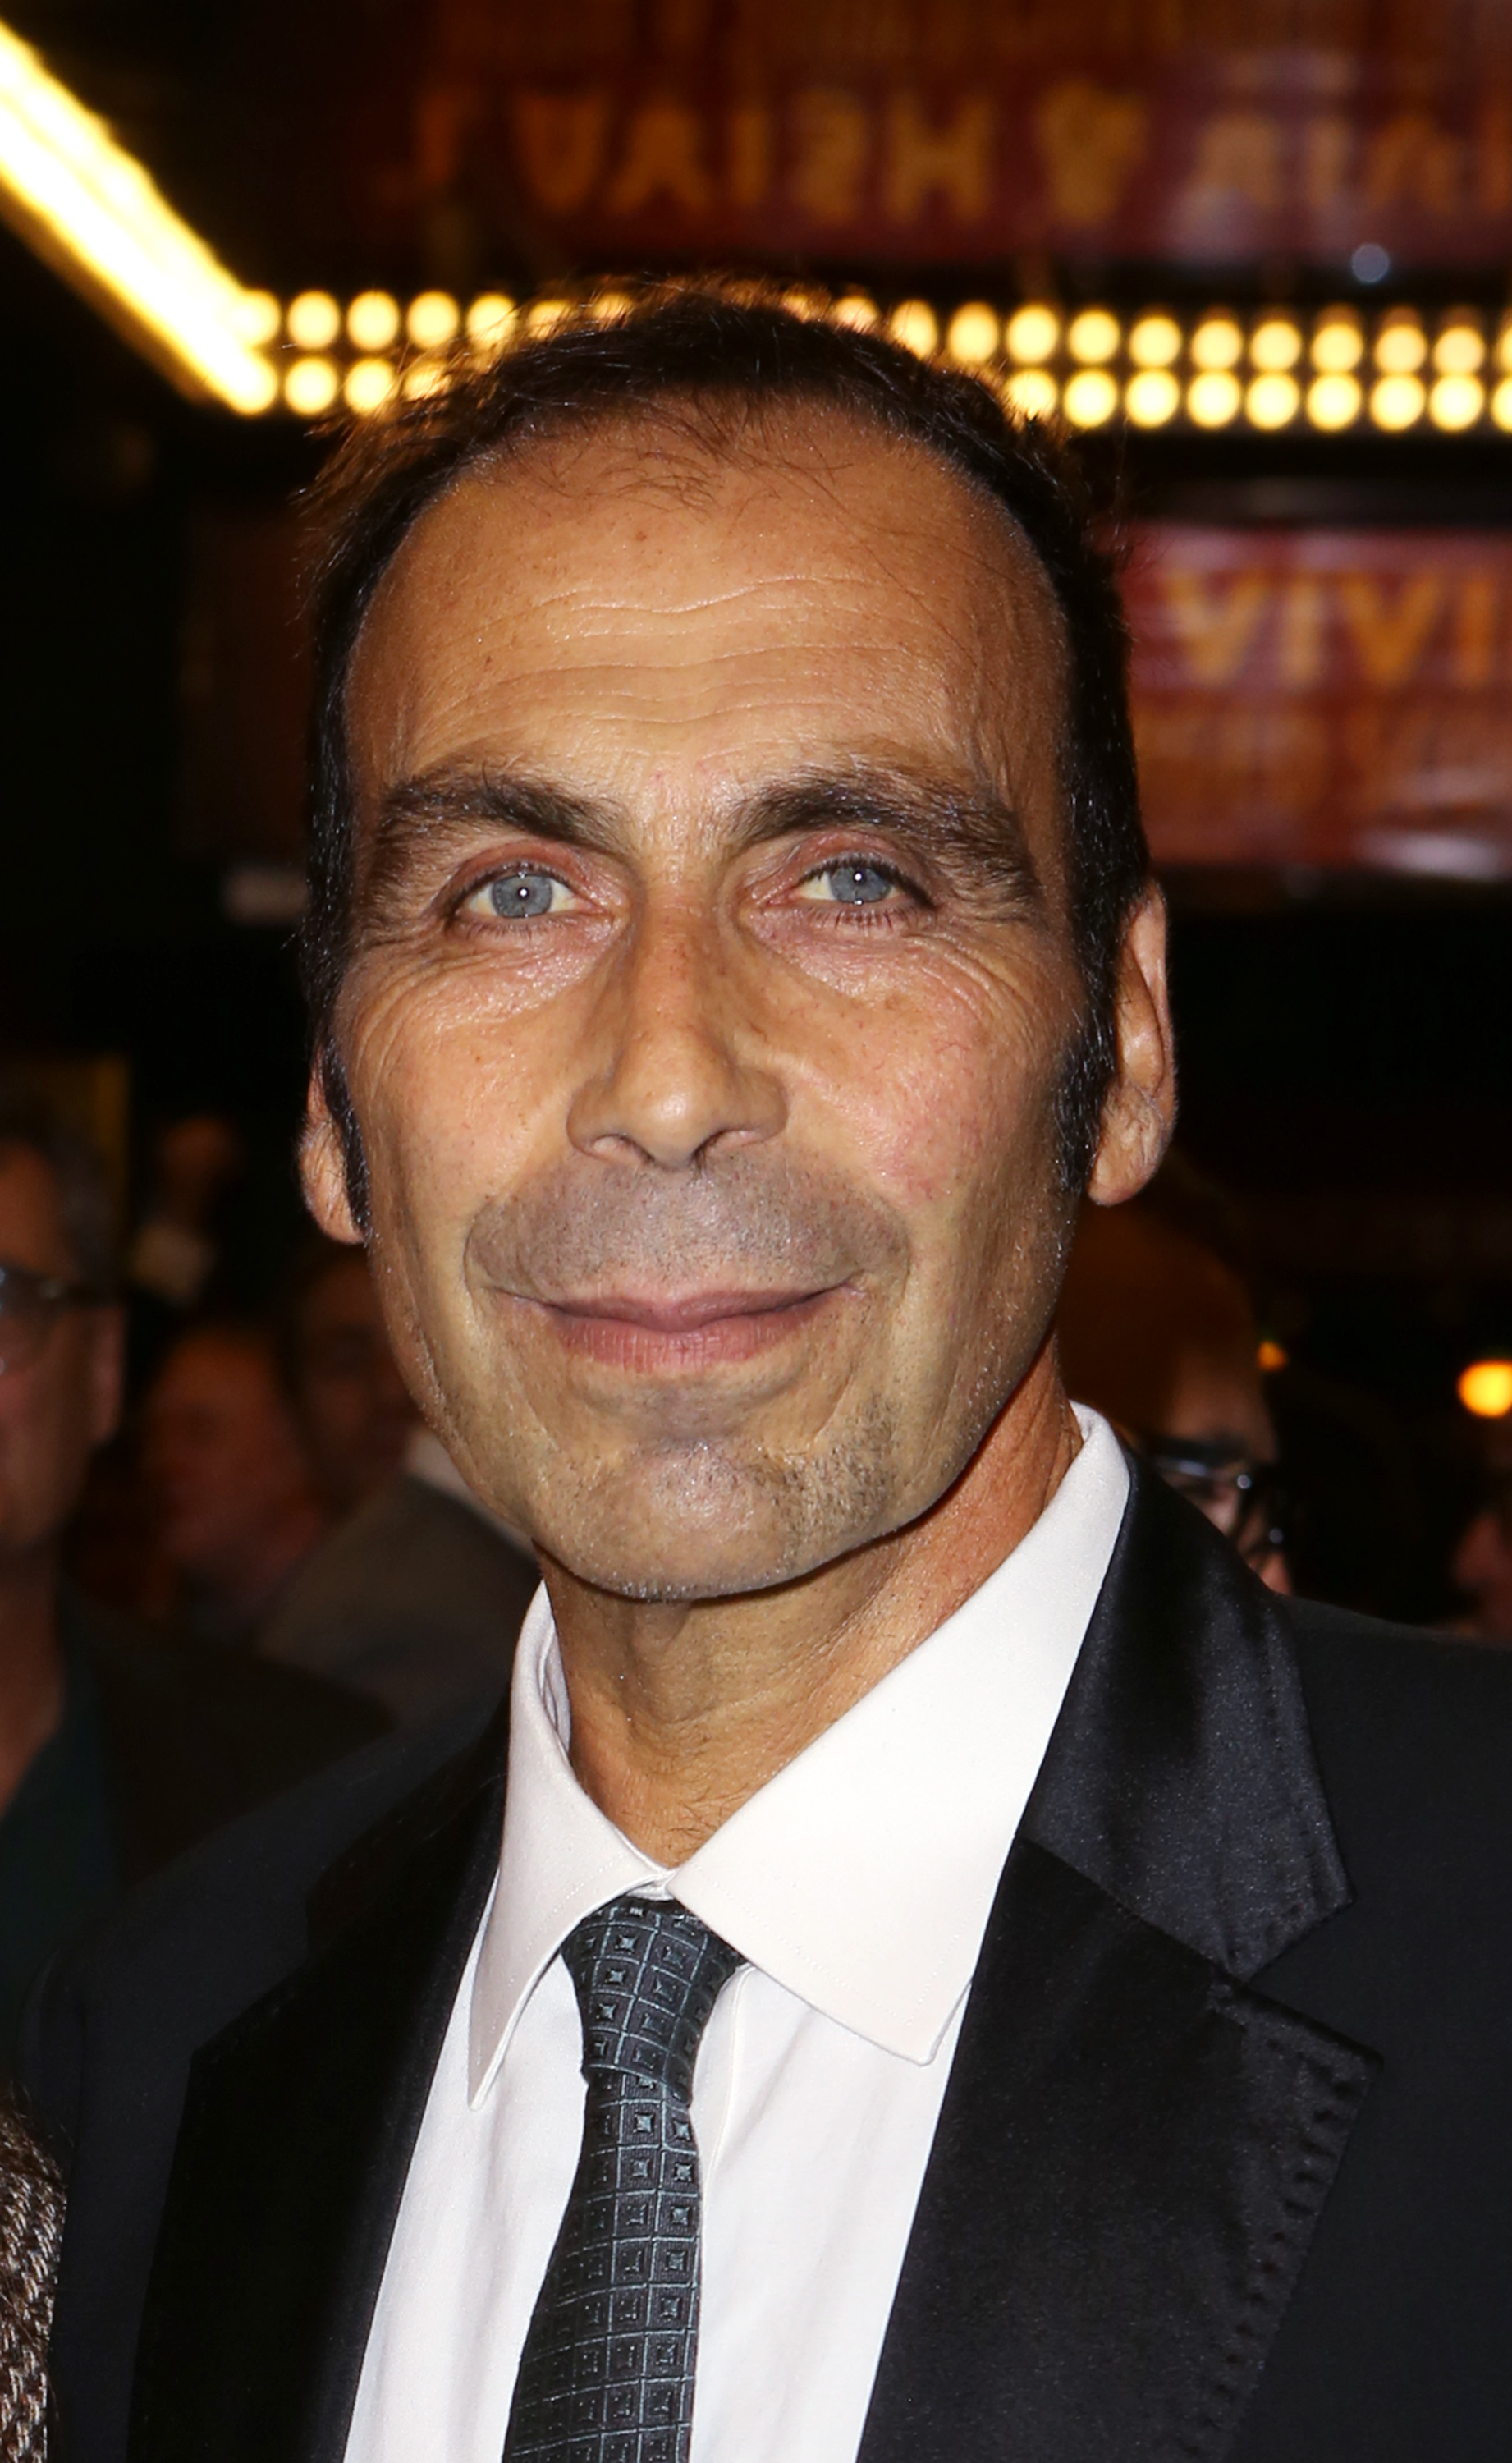 Taylor Negron in New York City on Oct. 28, 2014.